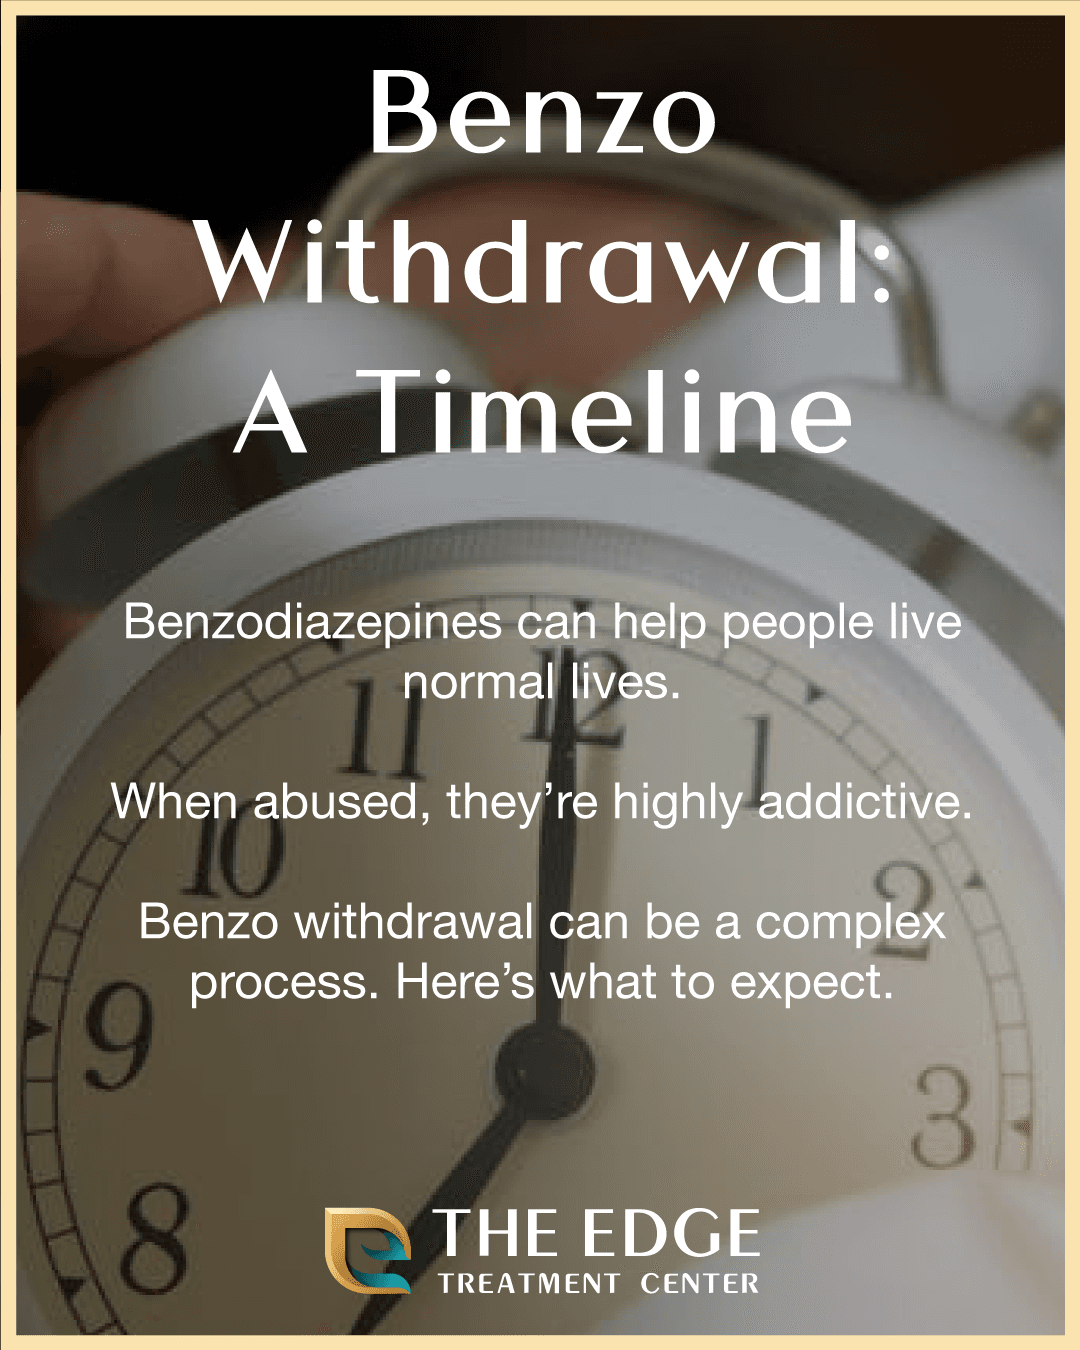 Benzo Withdrawal: A Timeline